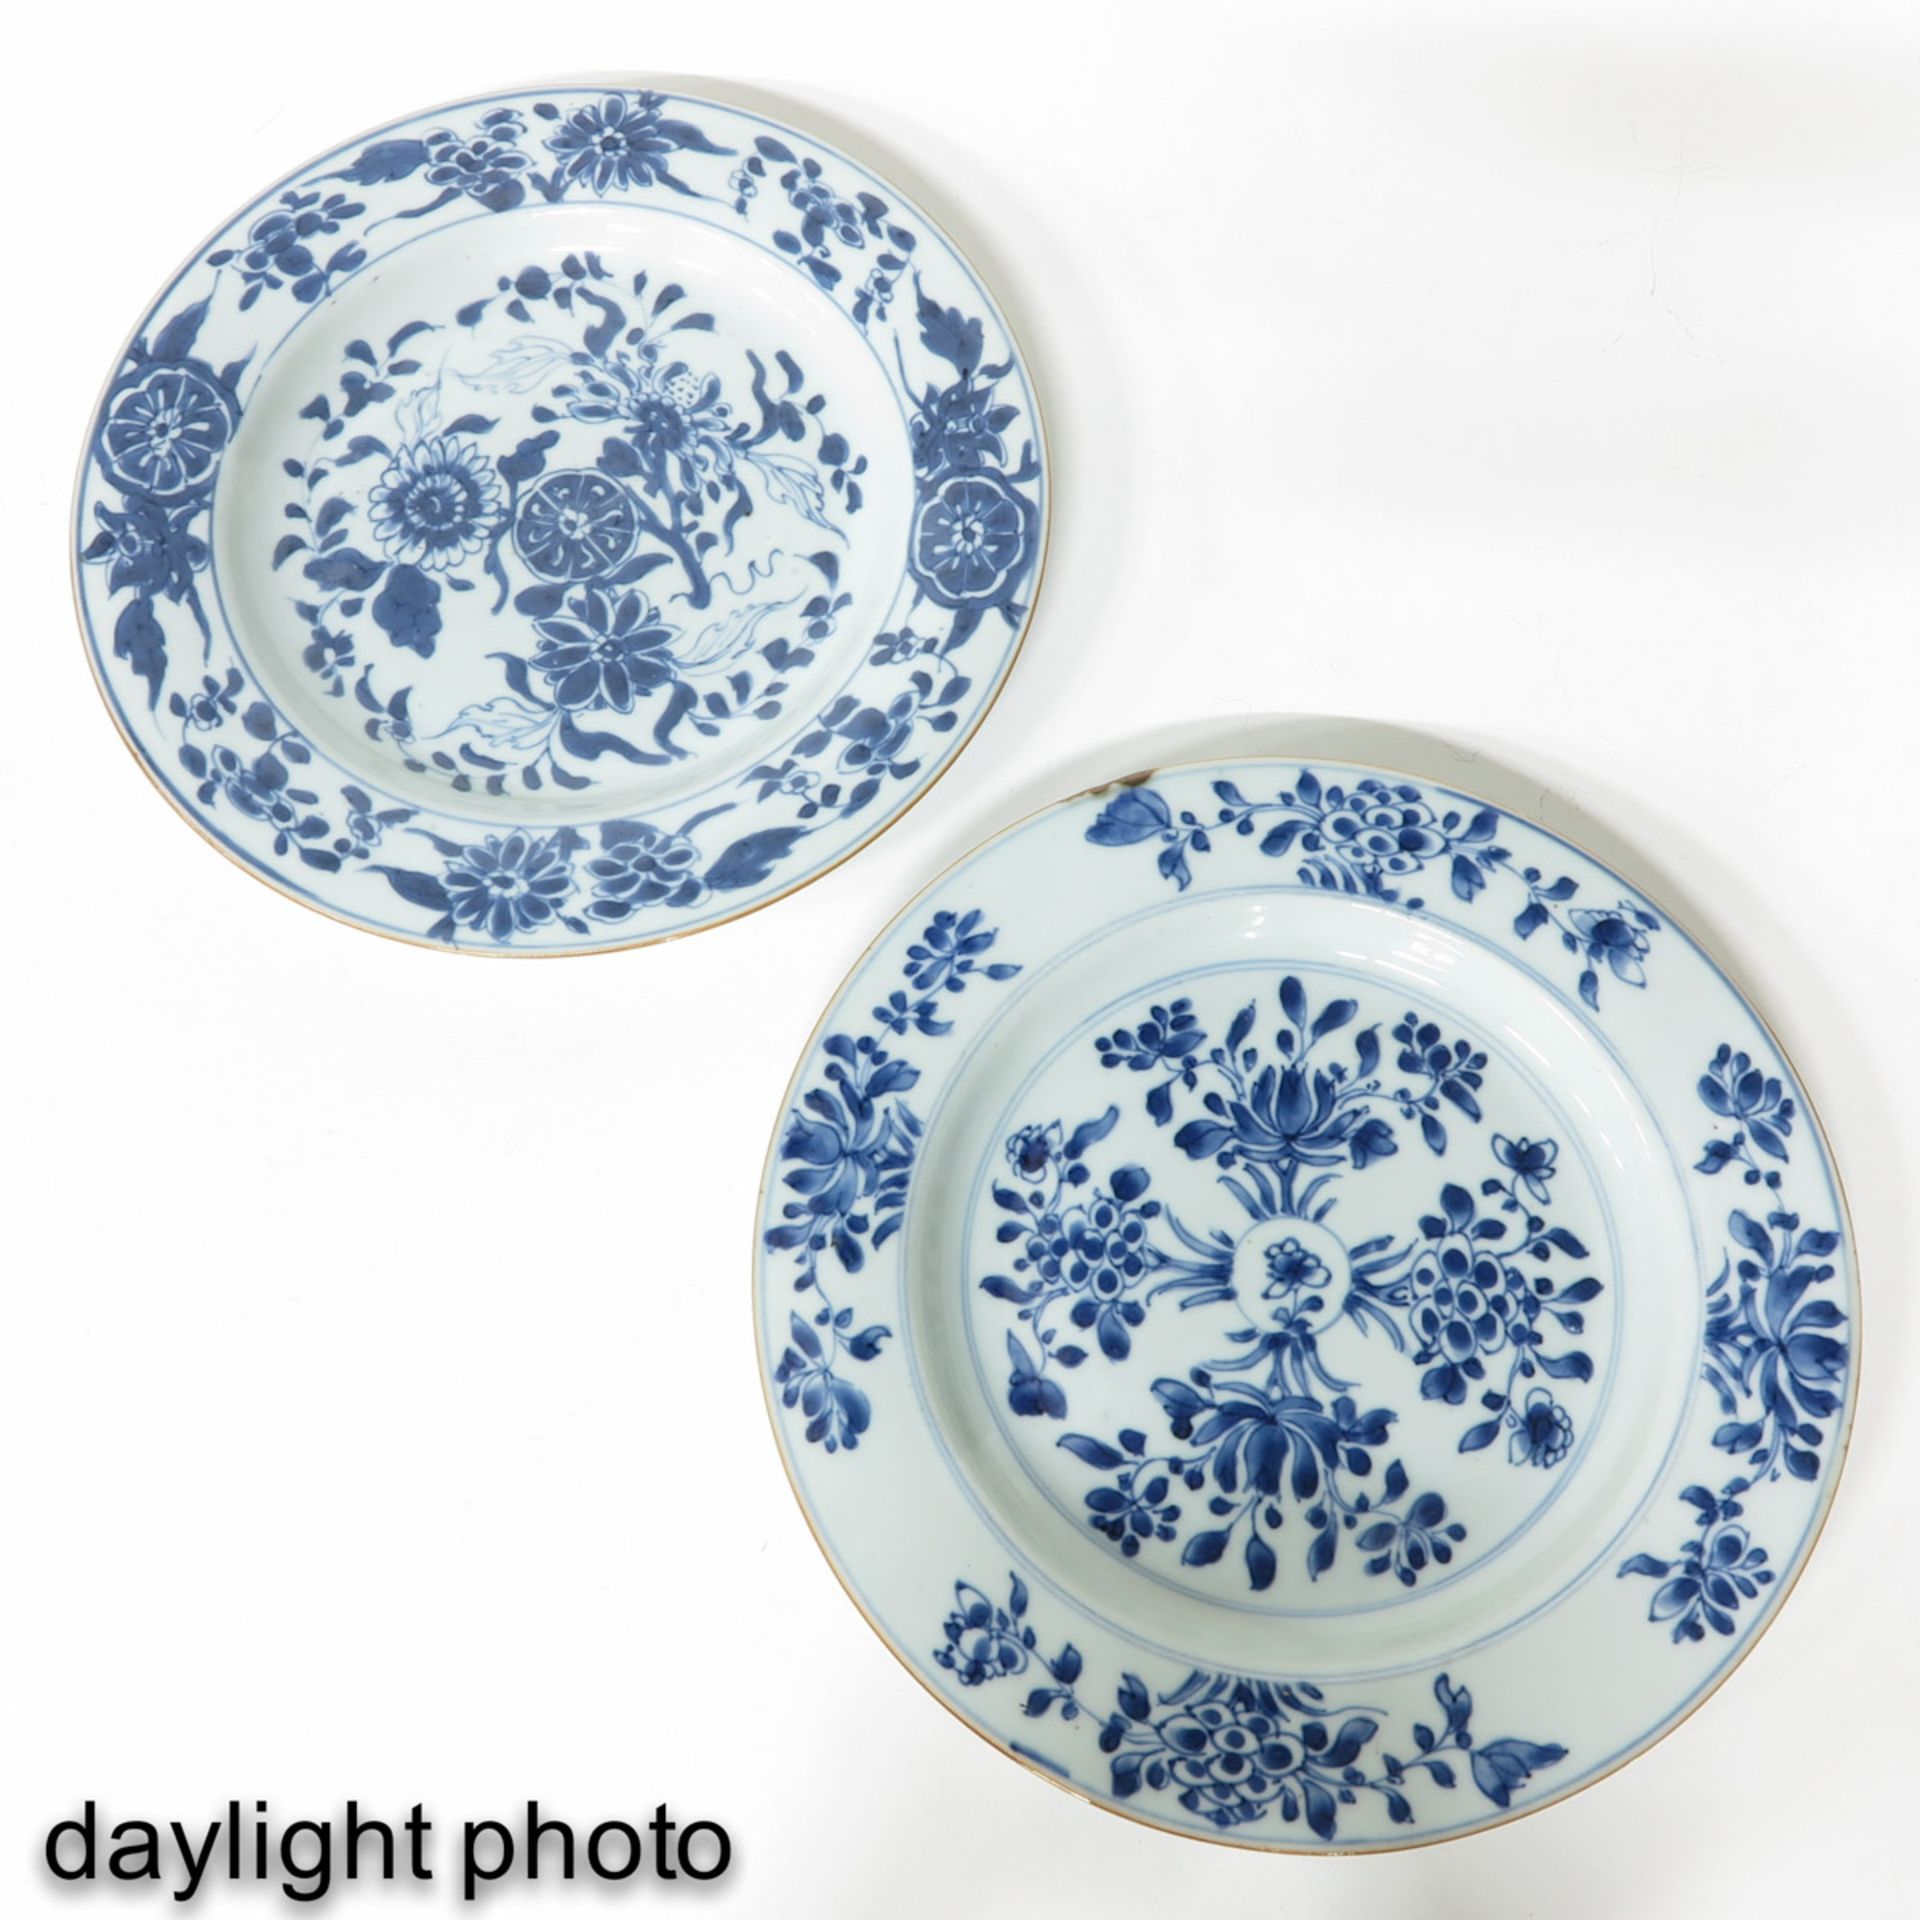 A Series of 5 Blue and White Plates - Image 7 of 9